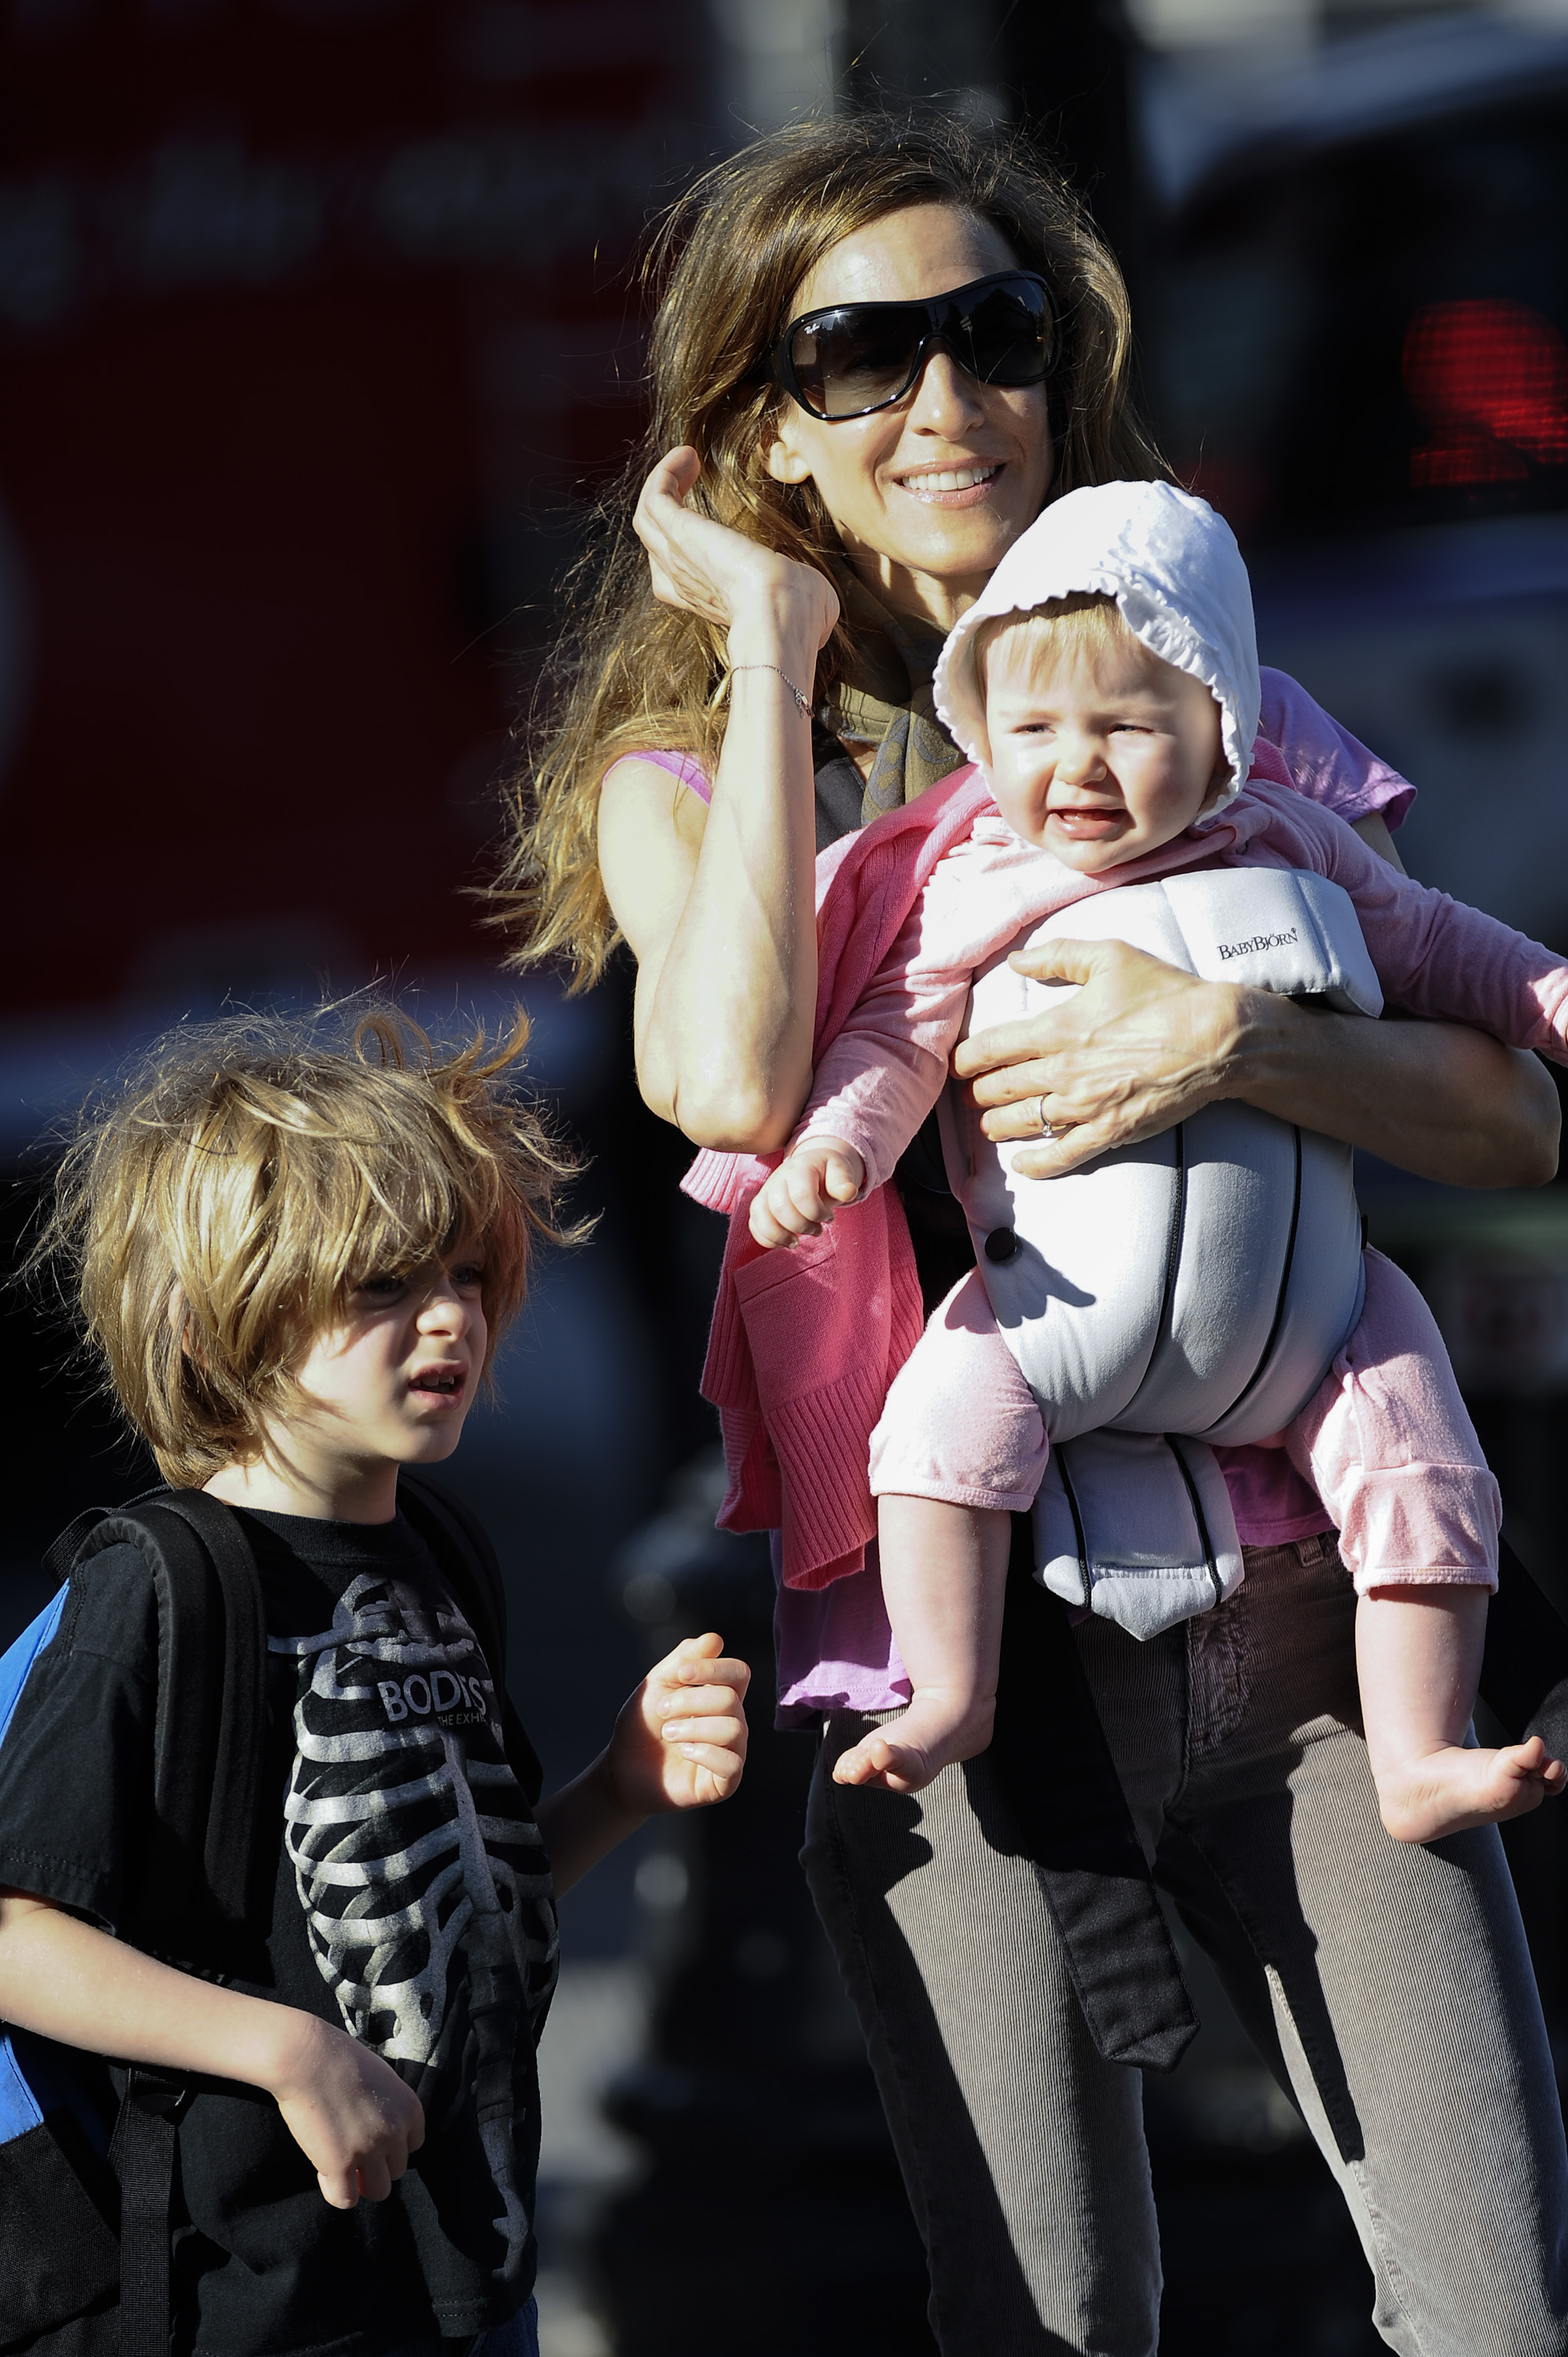 Sarah Jessica Parker with her son James and one of her twin daughters in New York City on April 07, 2010 | Source: Getty Images